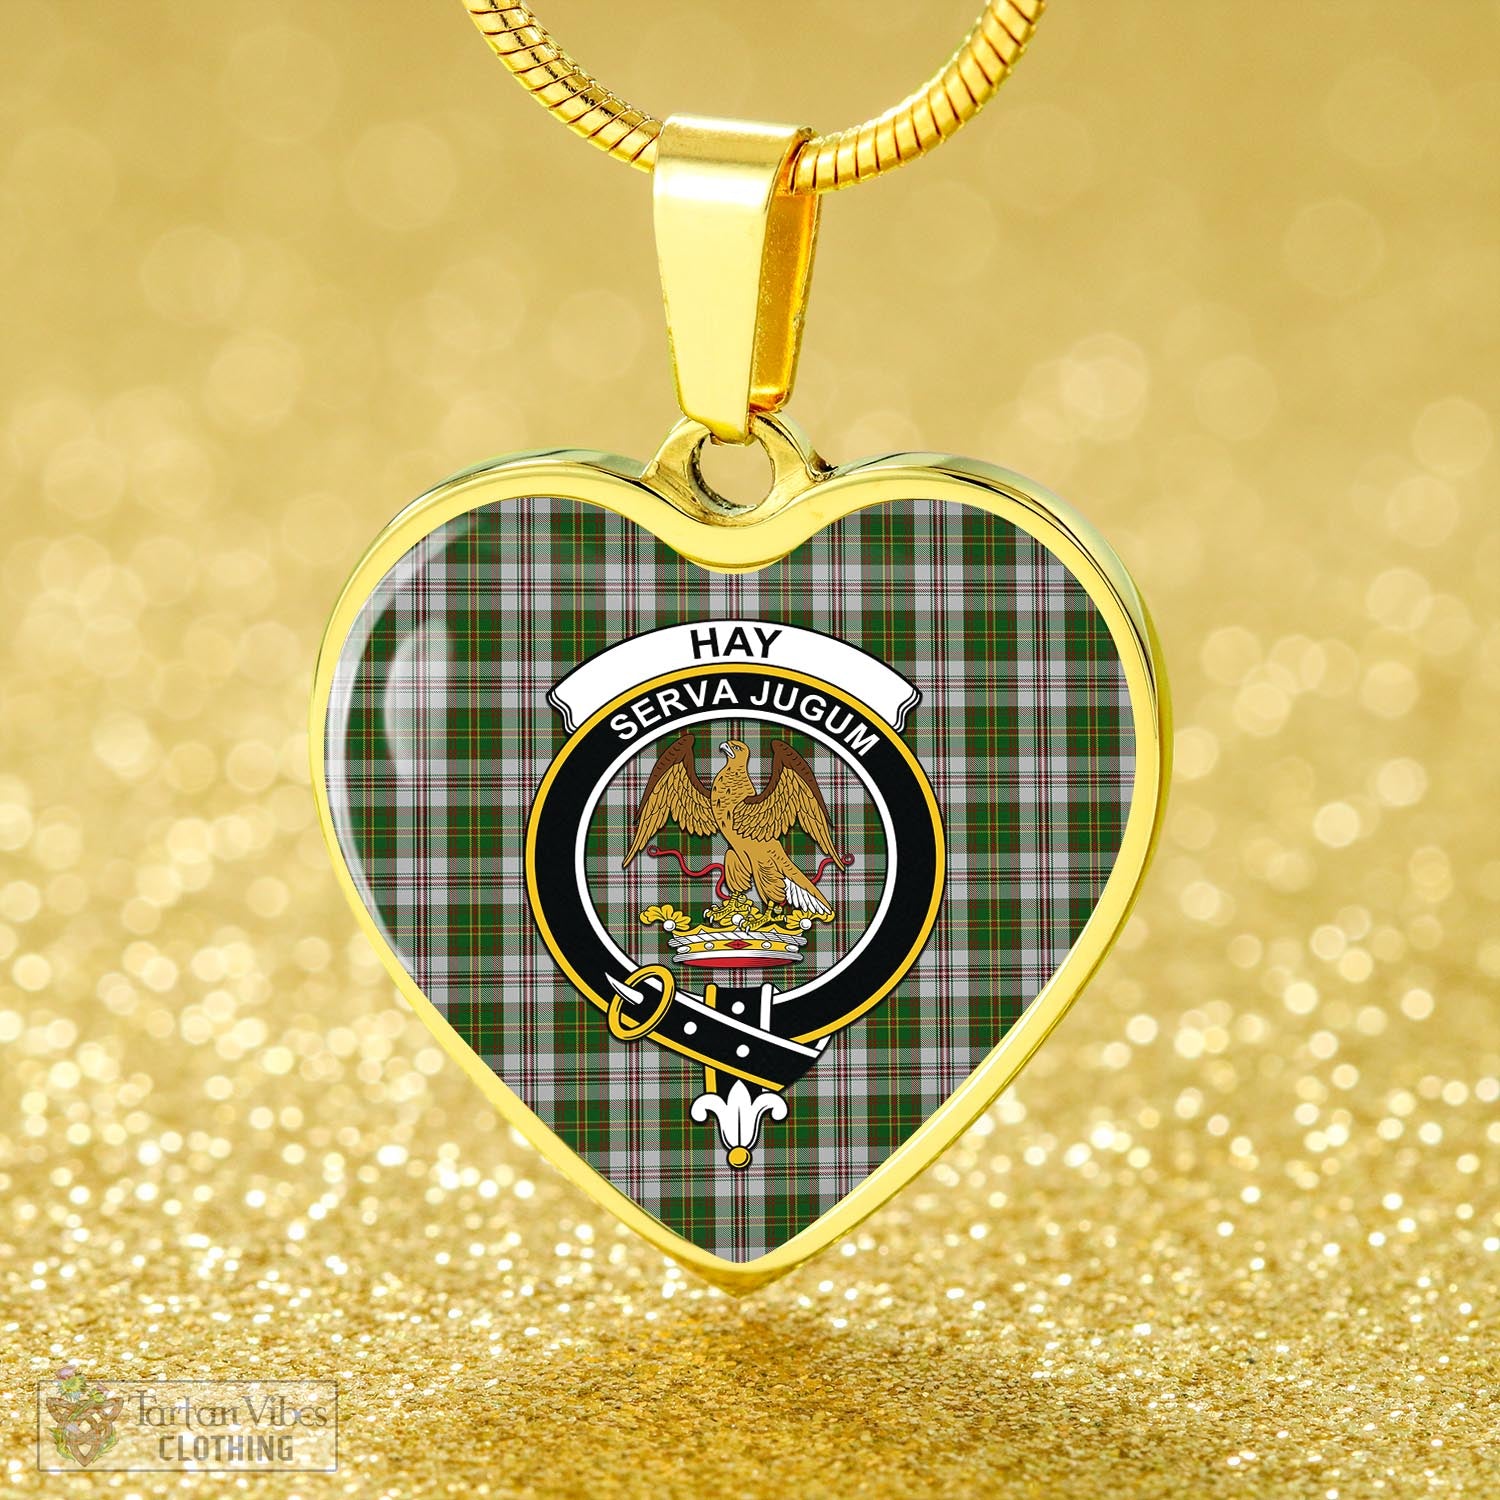 Tartan Vibes Clothing Hay White Dress Tartan Heart Necklace with Family Crest